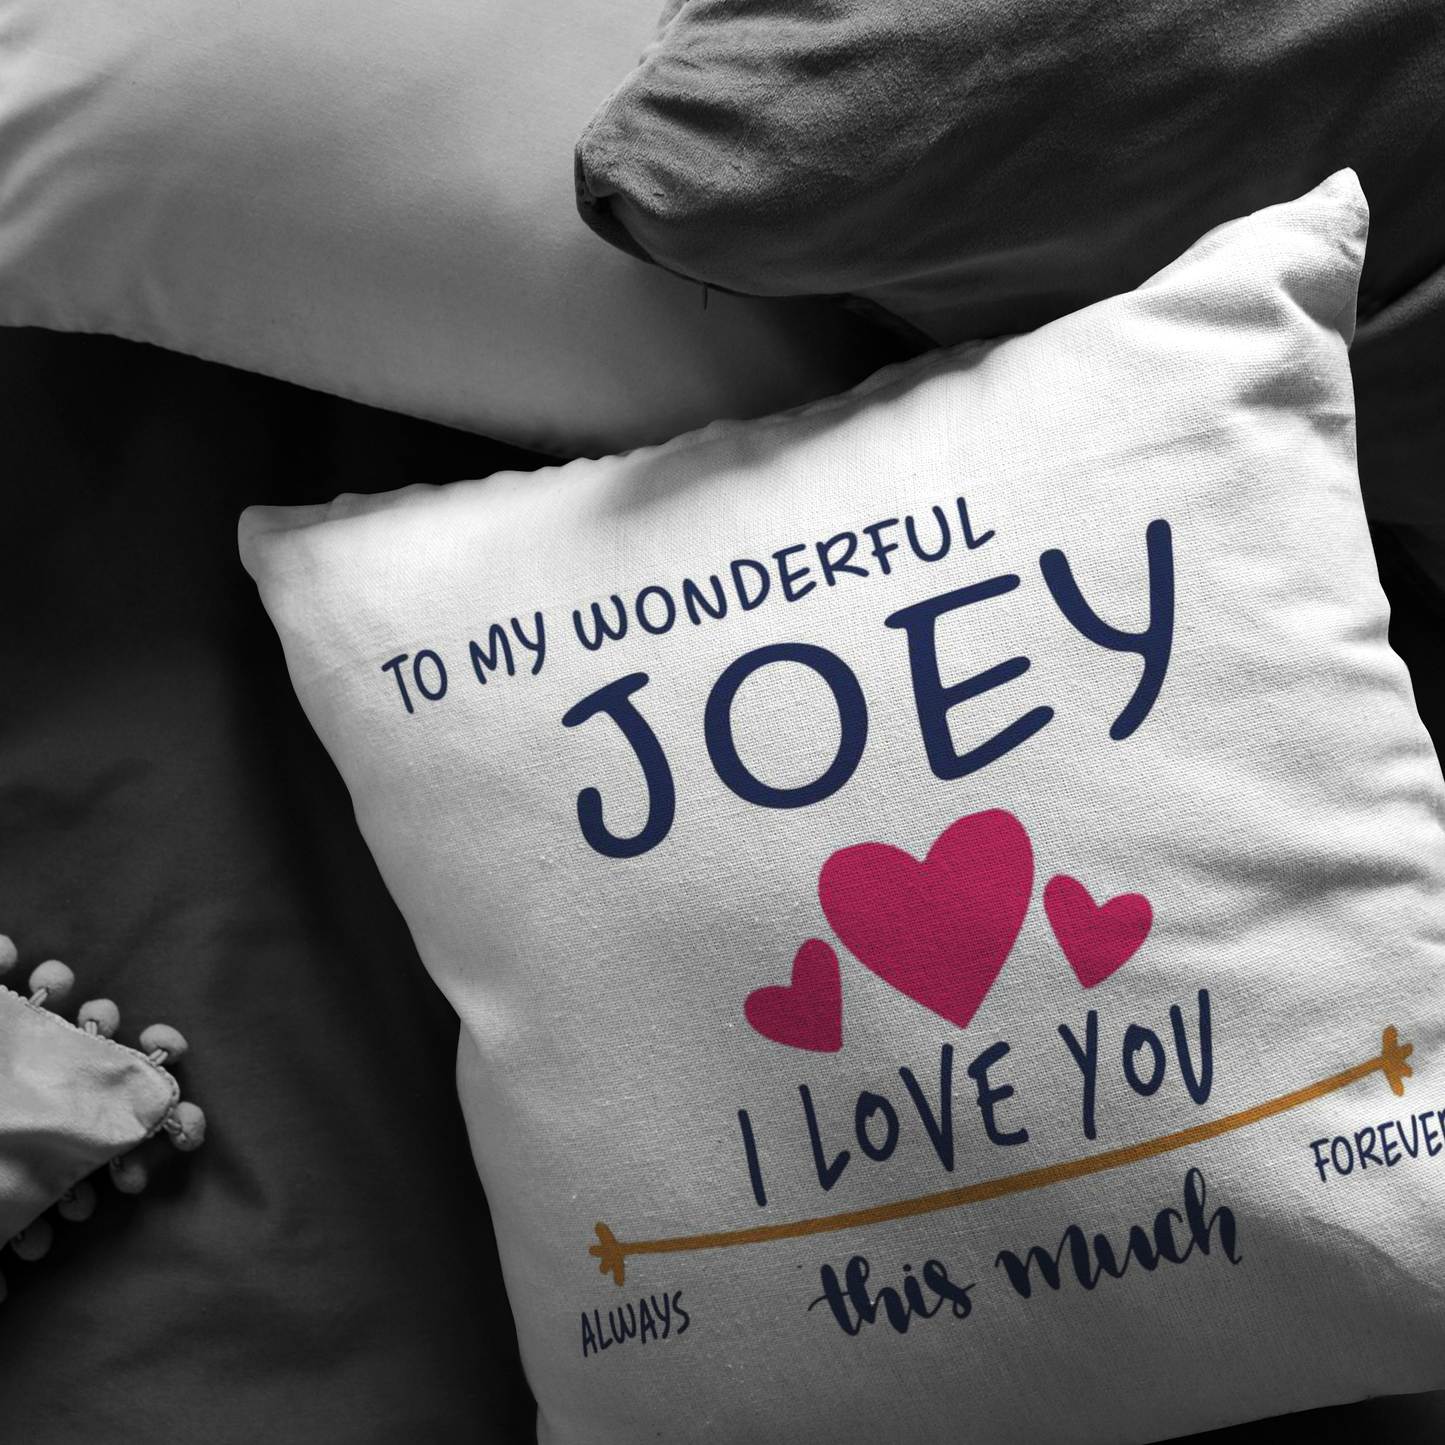 PL-21252228-sp-31672 - [ Joey | 1 | 1 ] (PI_ThrowPillowCovers) Valentines Day Pillow Covers 18x18 - to My Wonderful Joey I